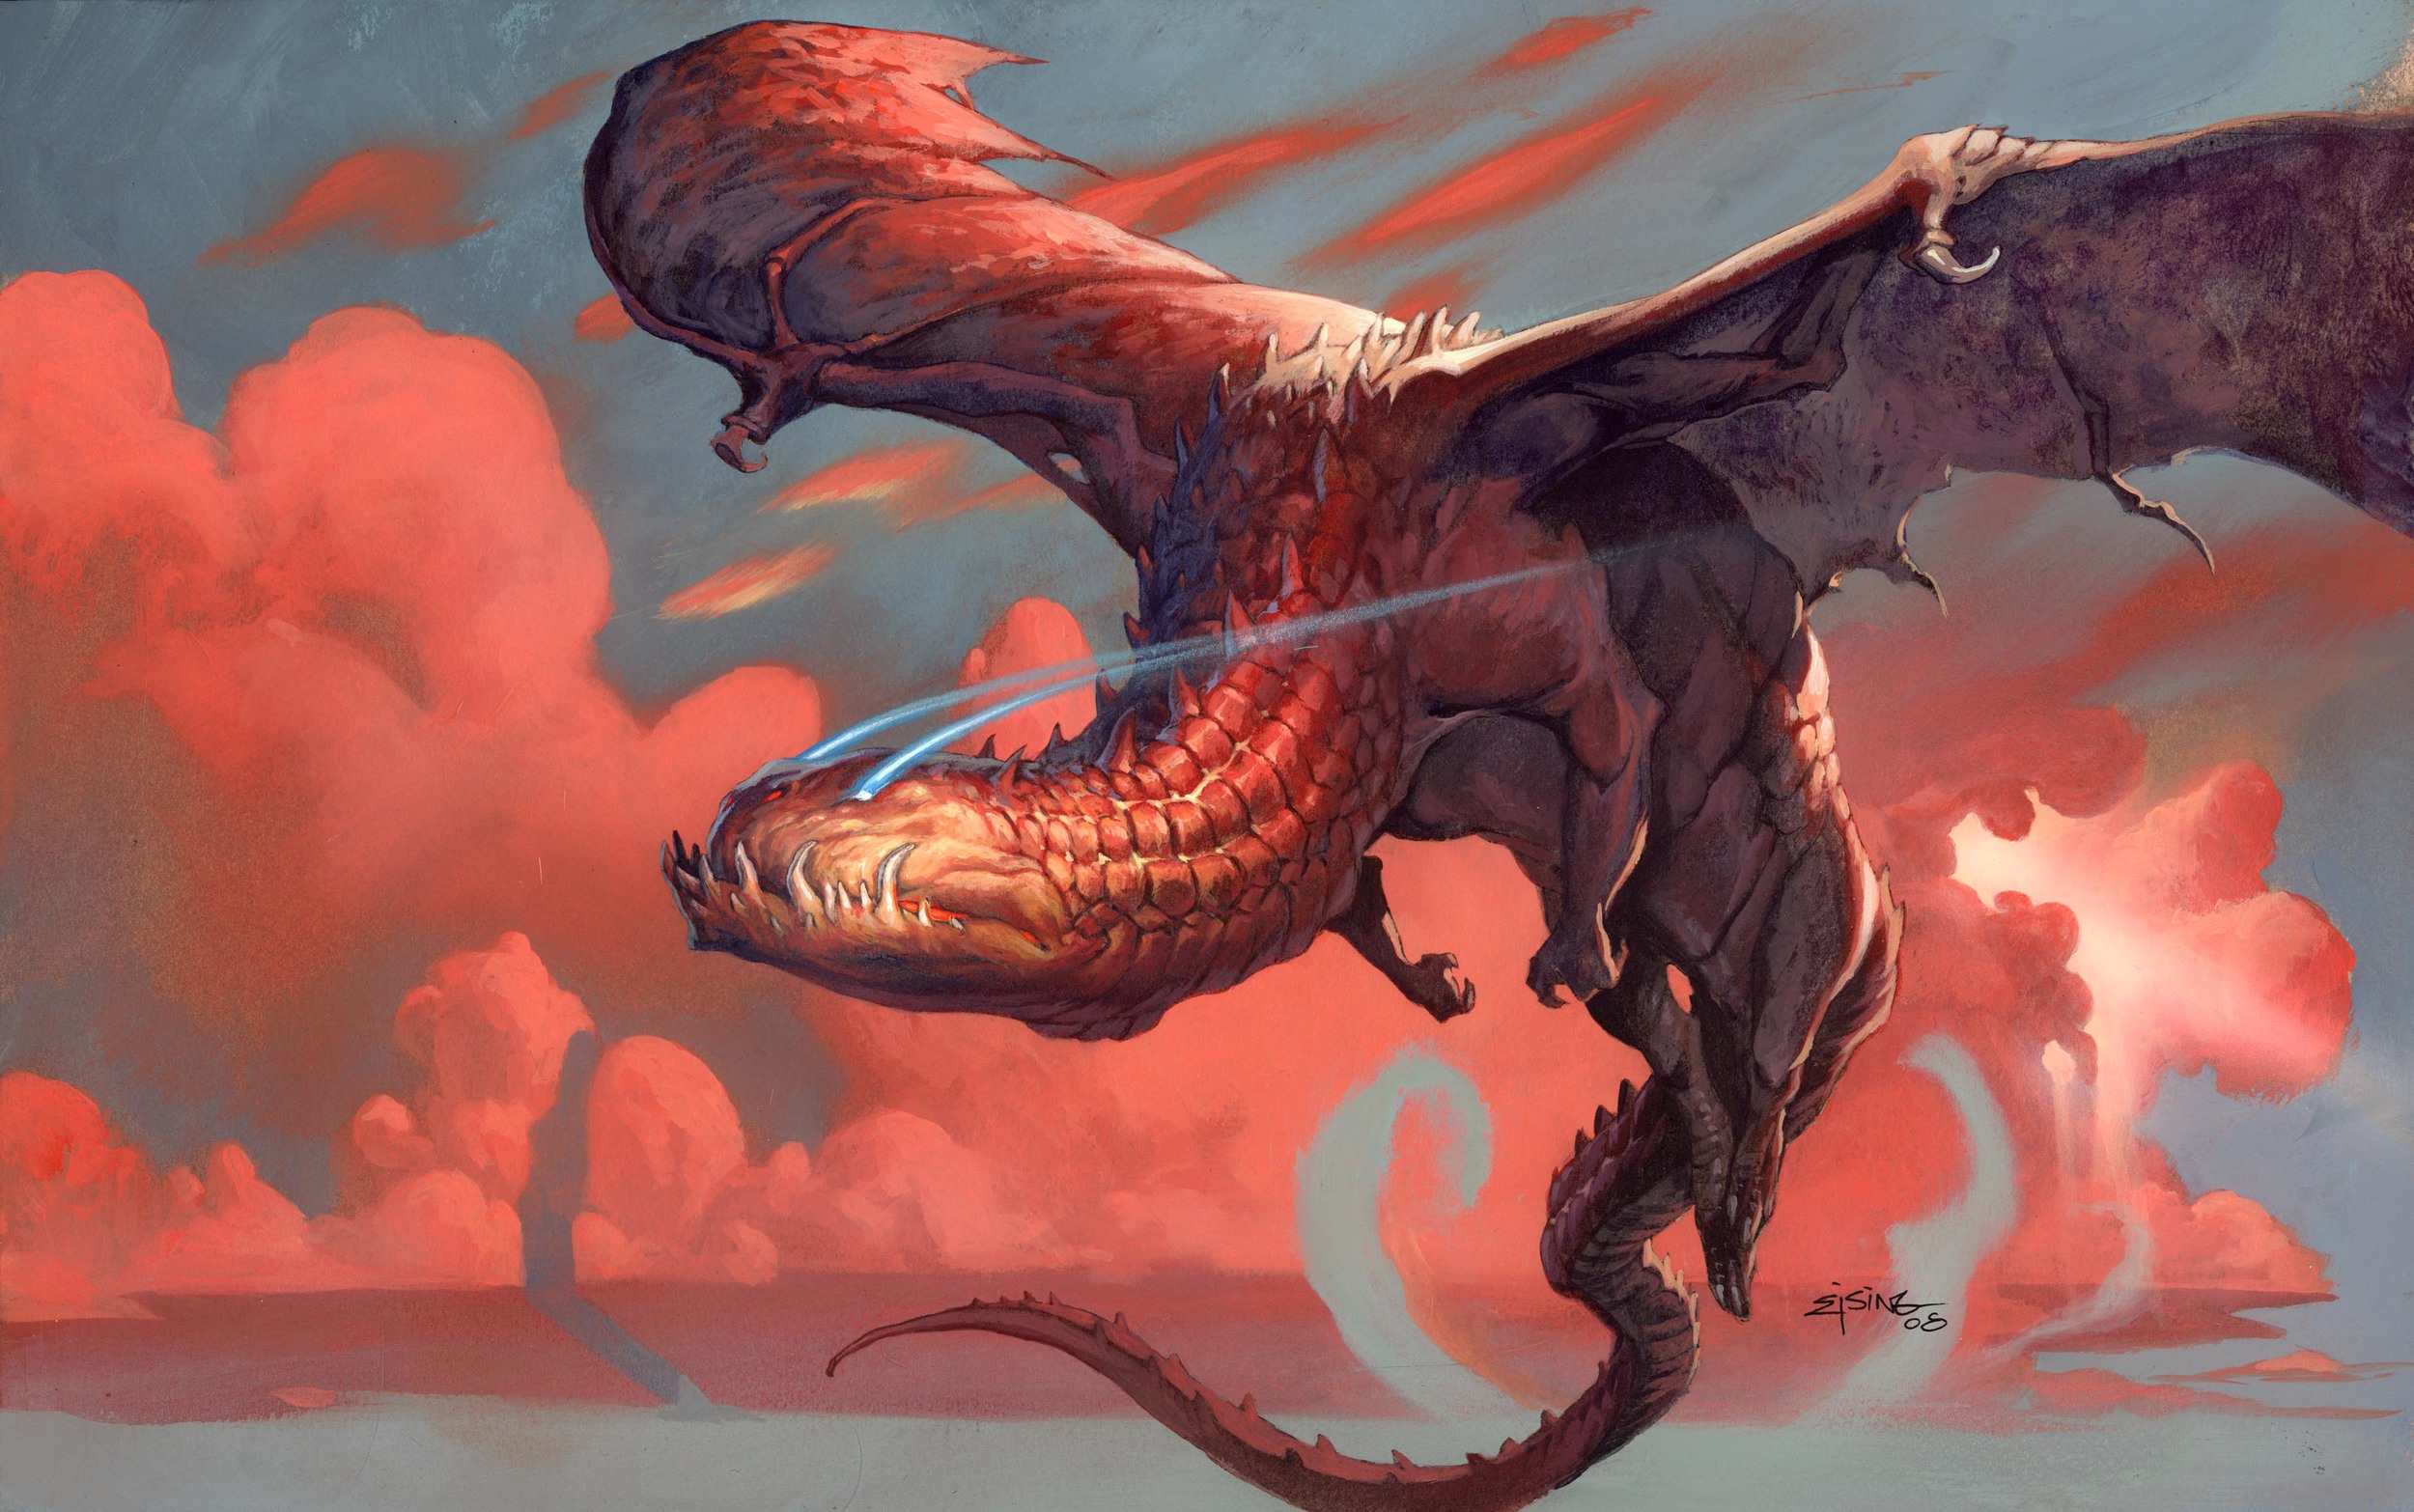 art id 121019 Mage-Controlled Dragon finished.jpg